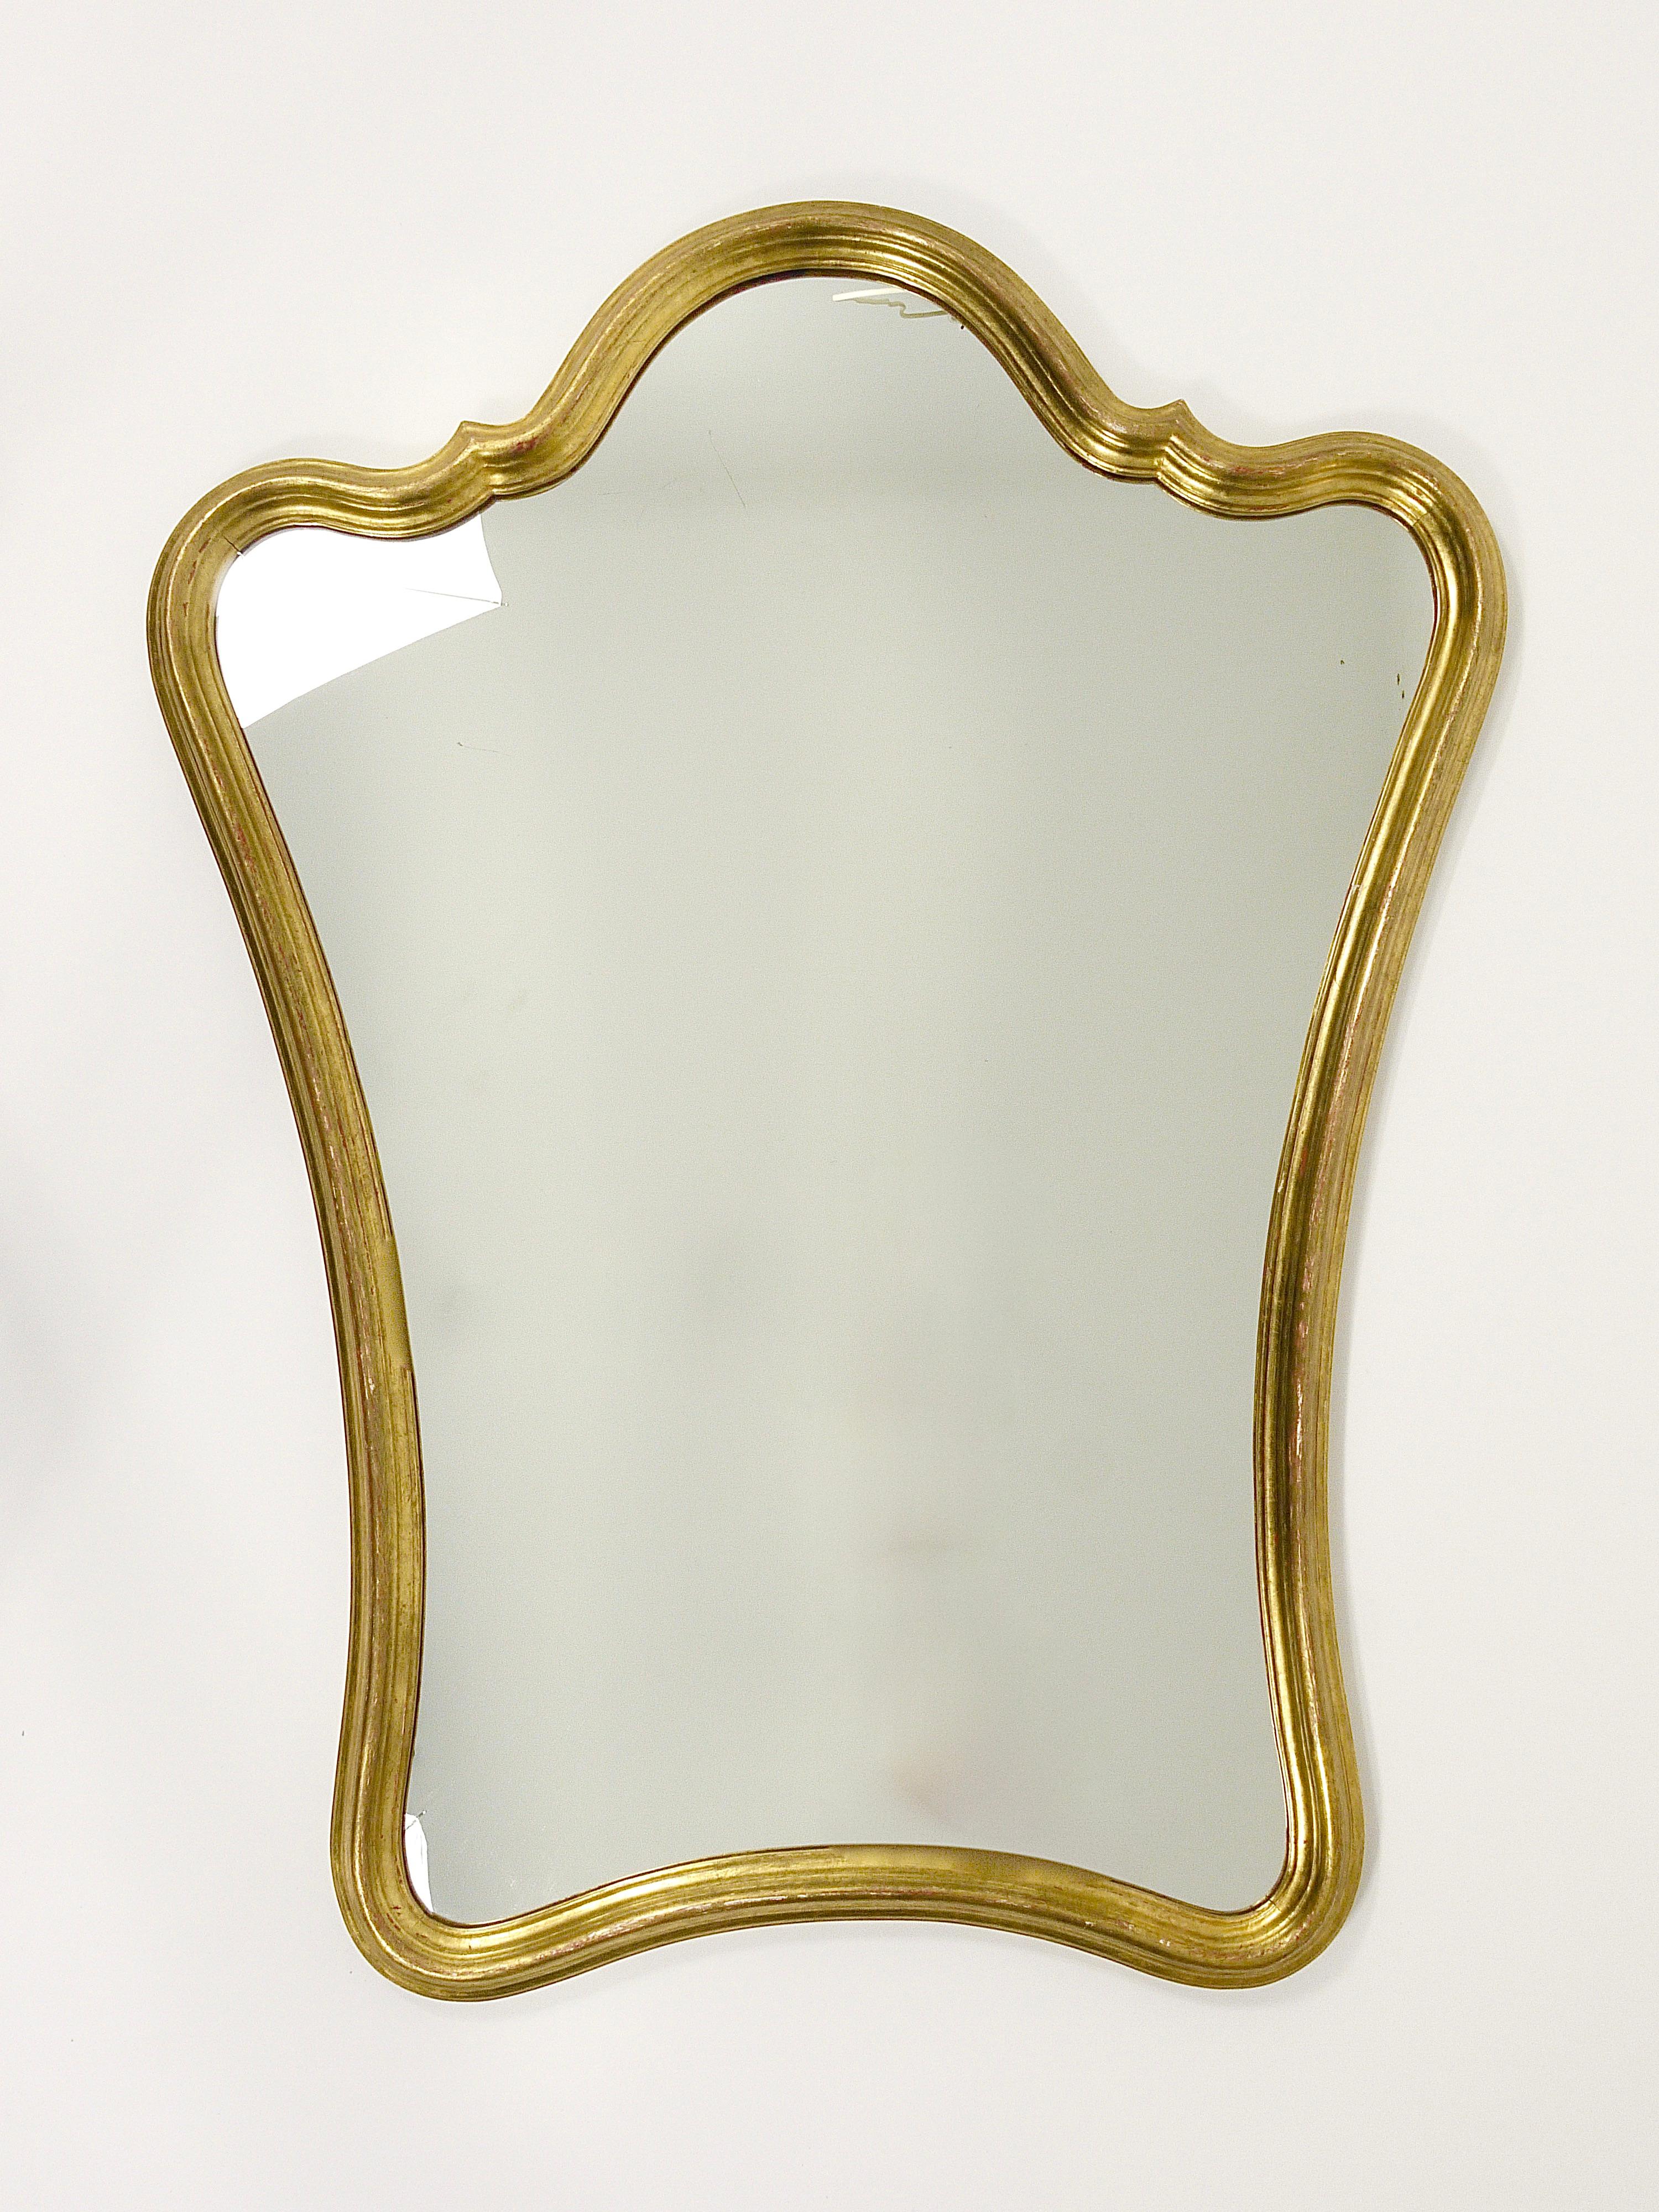 Italian Chelini Firenze Curved Gilt Wood Mid-Century Wall Mirror, Italy, 1950s For Sale